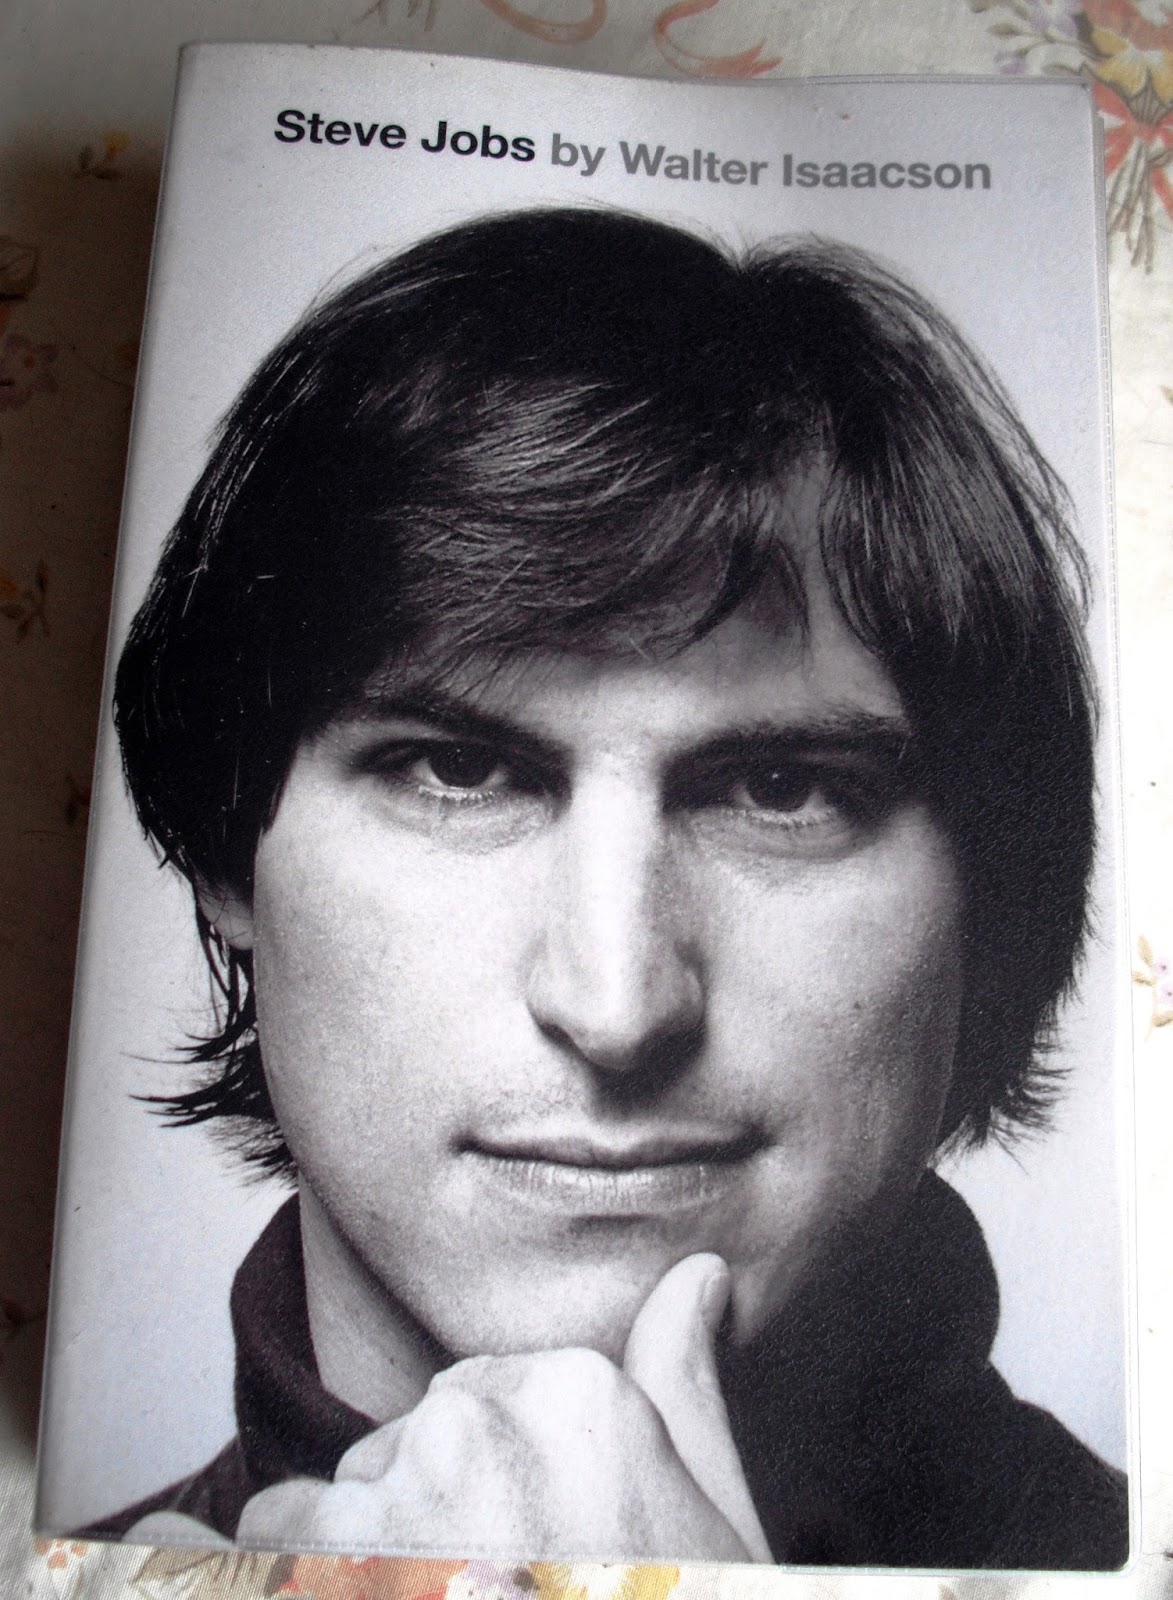 Life After Money Steve Jobs by Walter Isaacson. Book review.